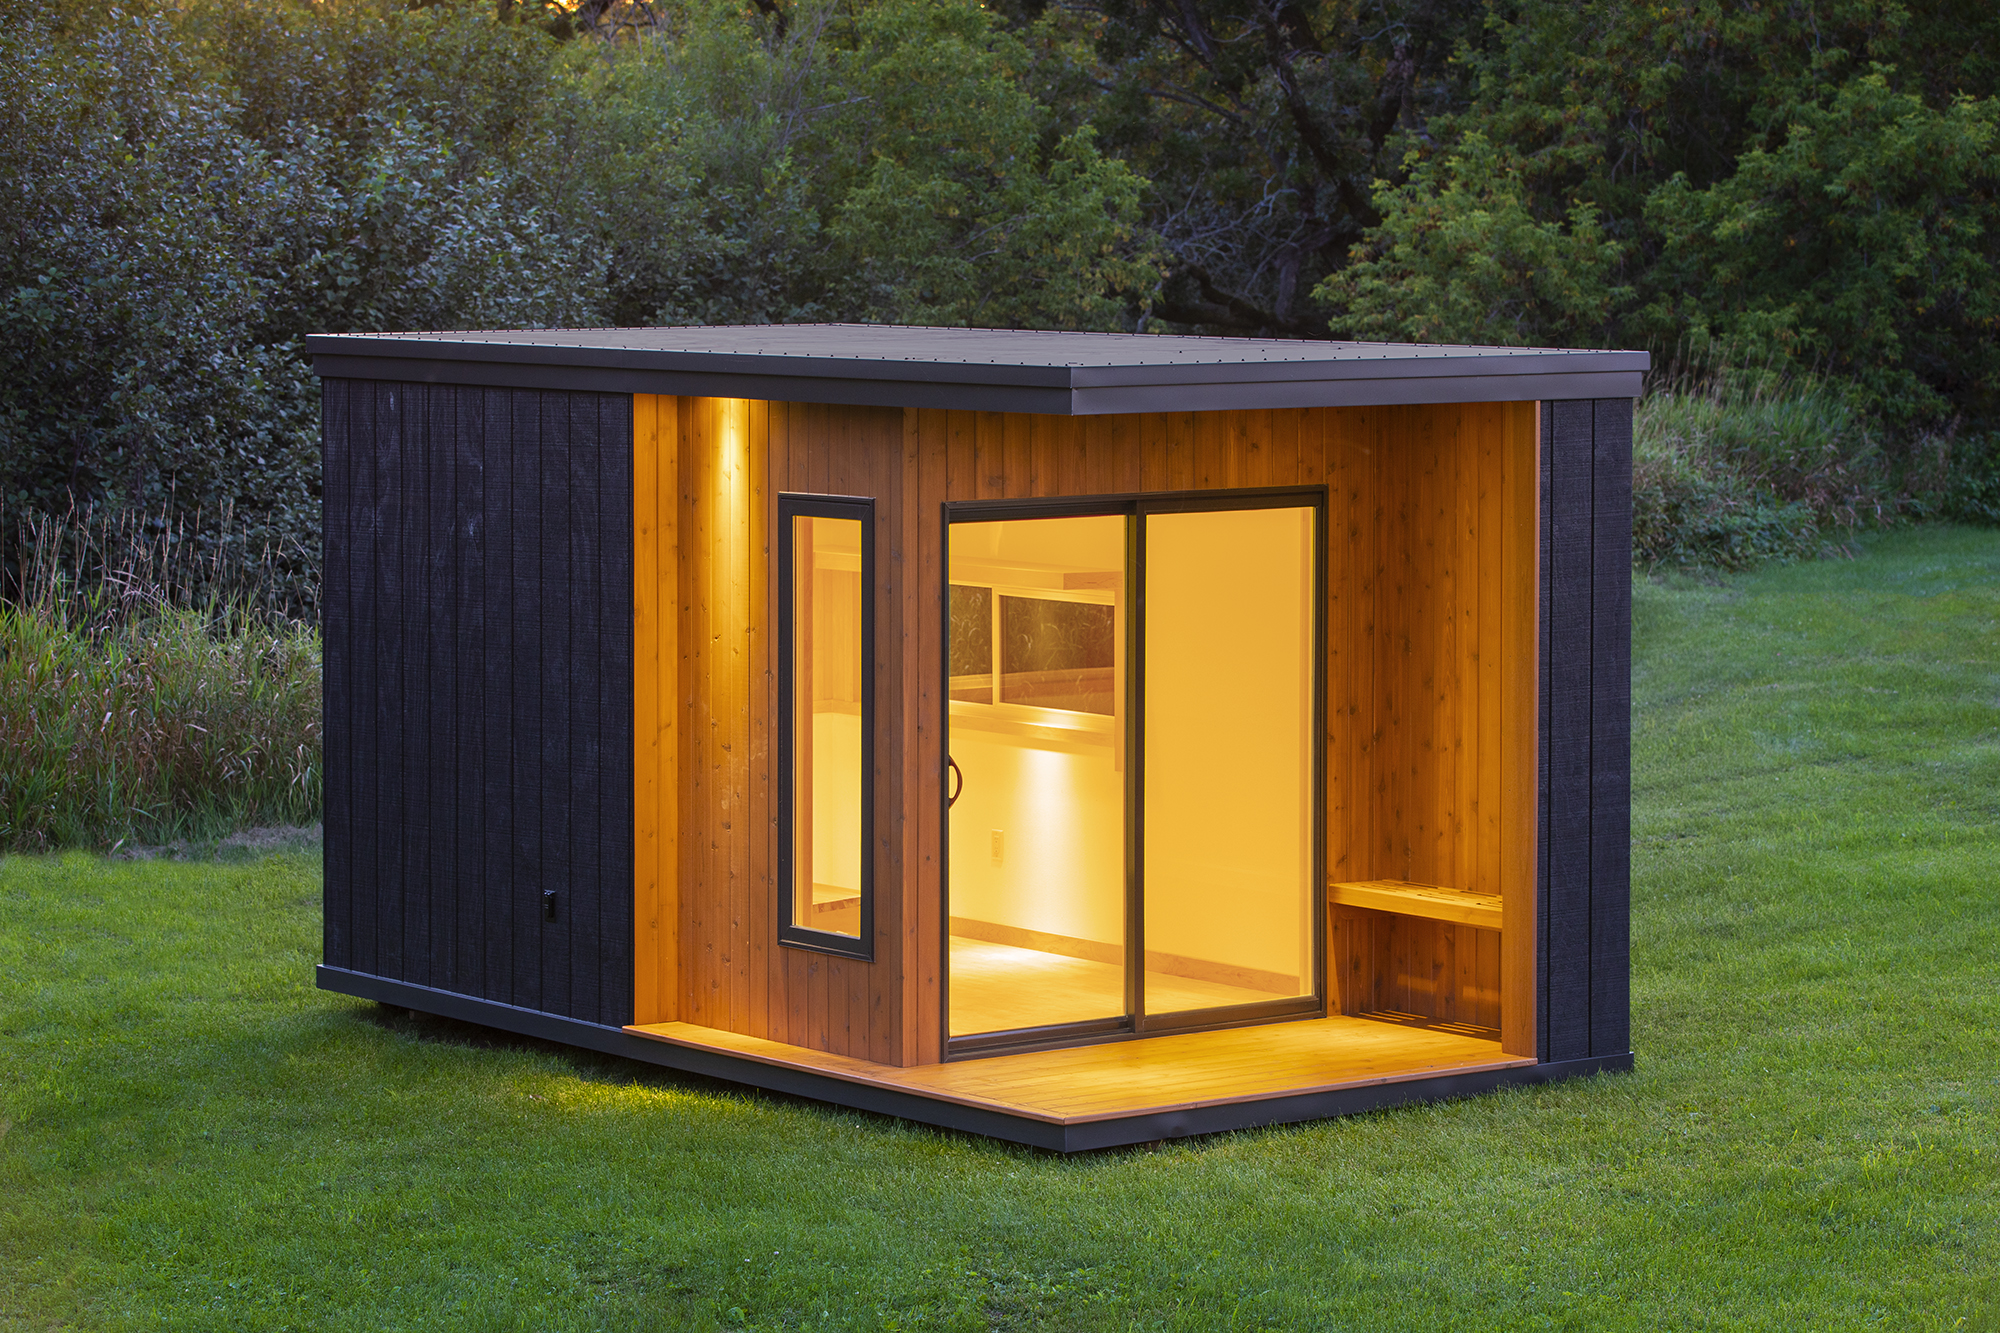 A small boxy dwelling sits on a grassy plot. It is clad in black and natural wood, with a small covered porch and sliding glass doors to the inside.